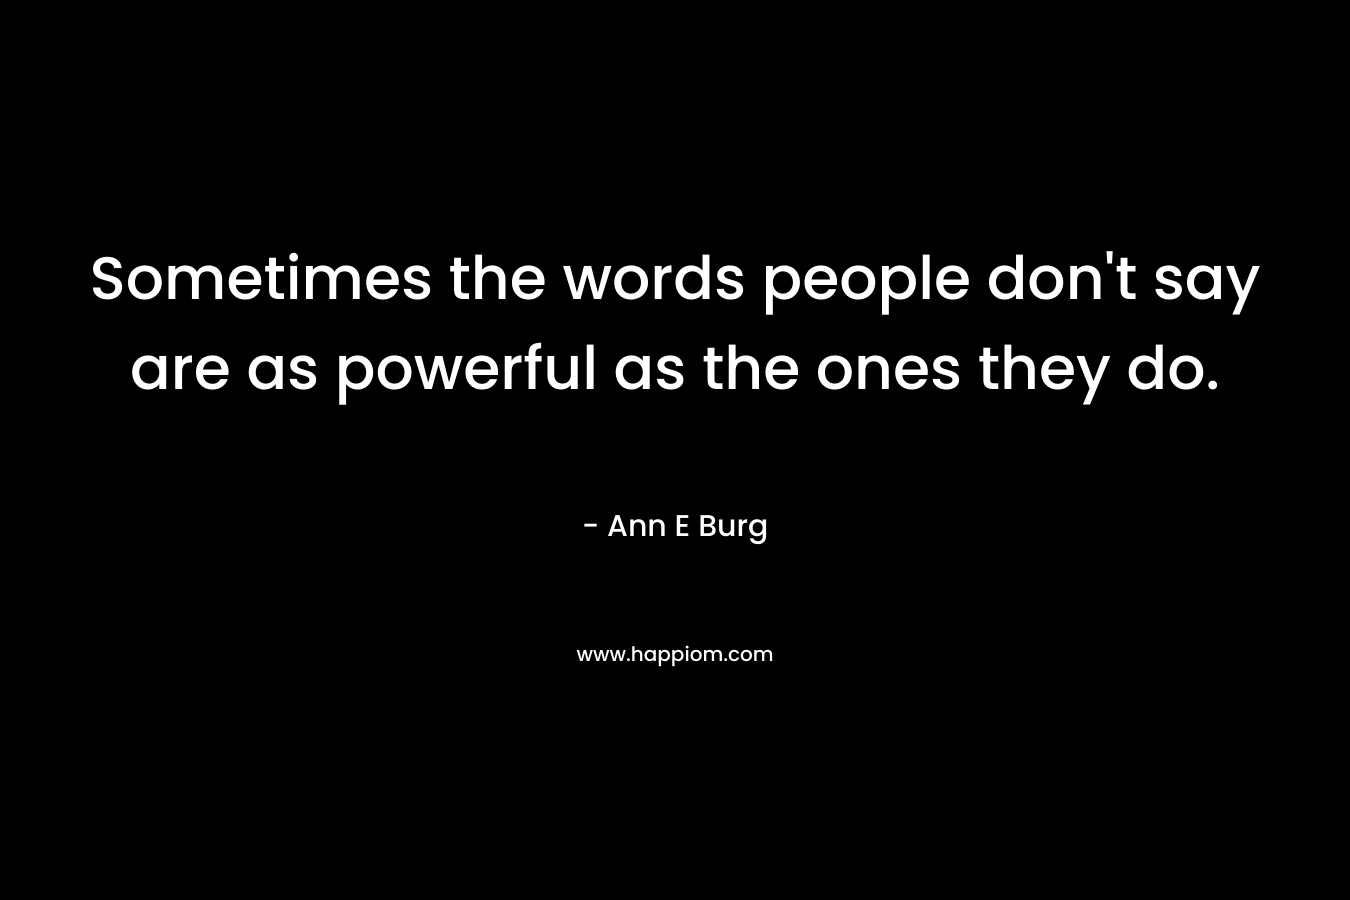 Sometimes the words people don't say are as powerful as the ones they do.